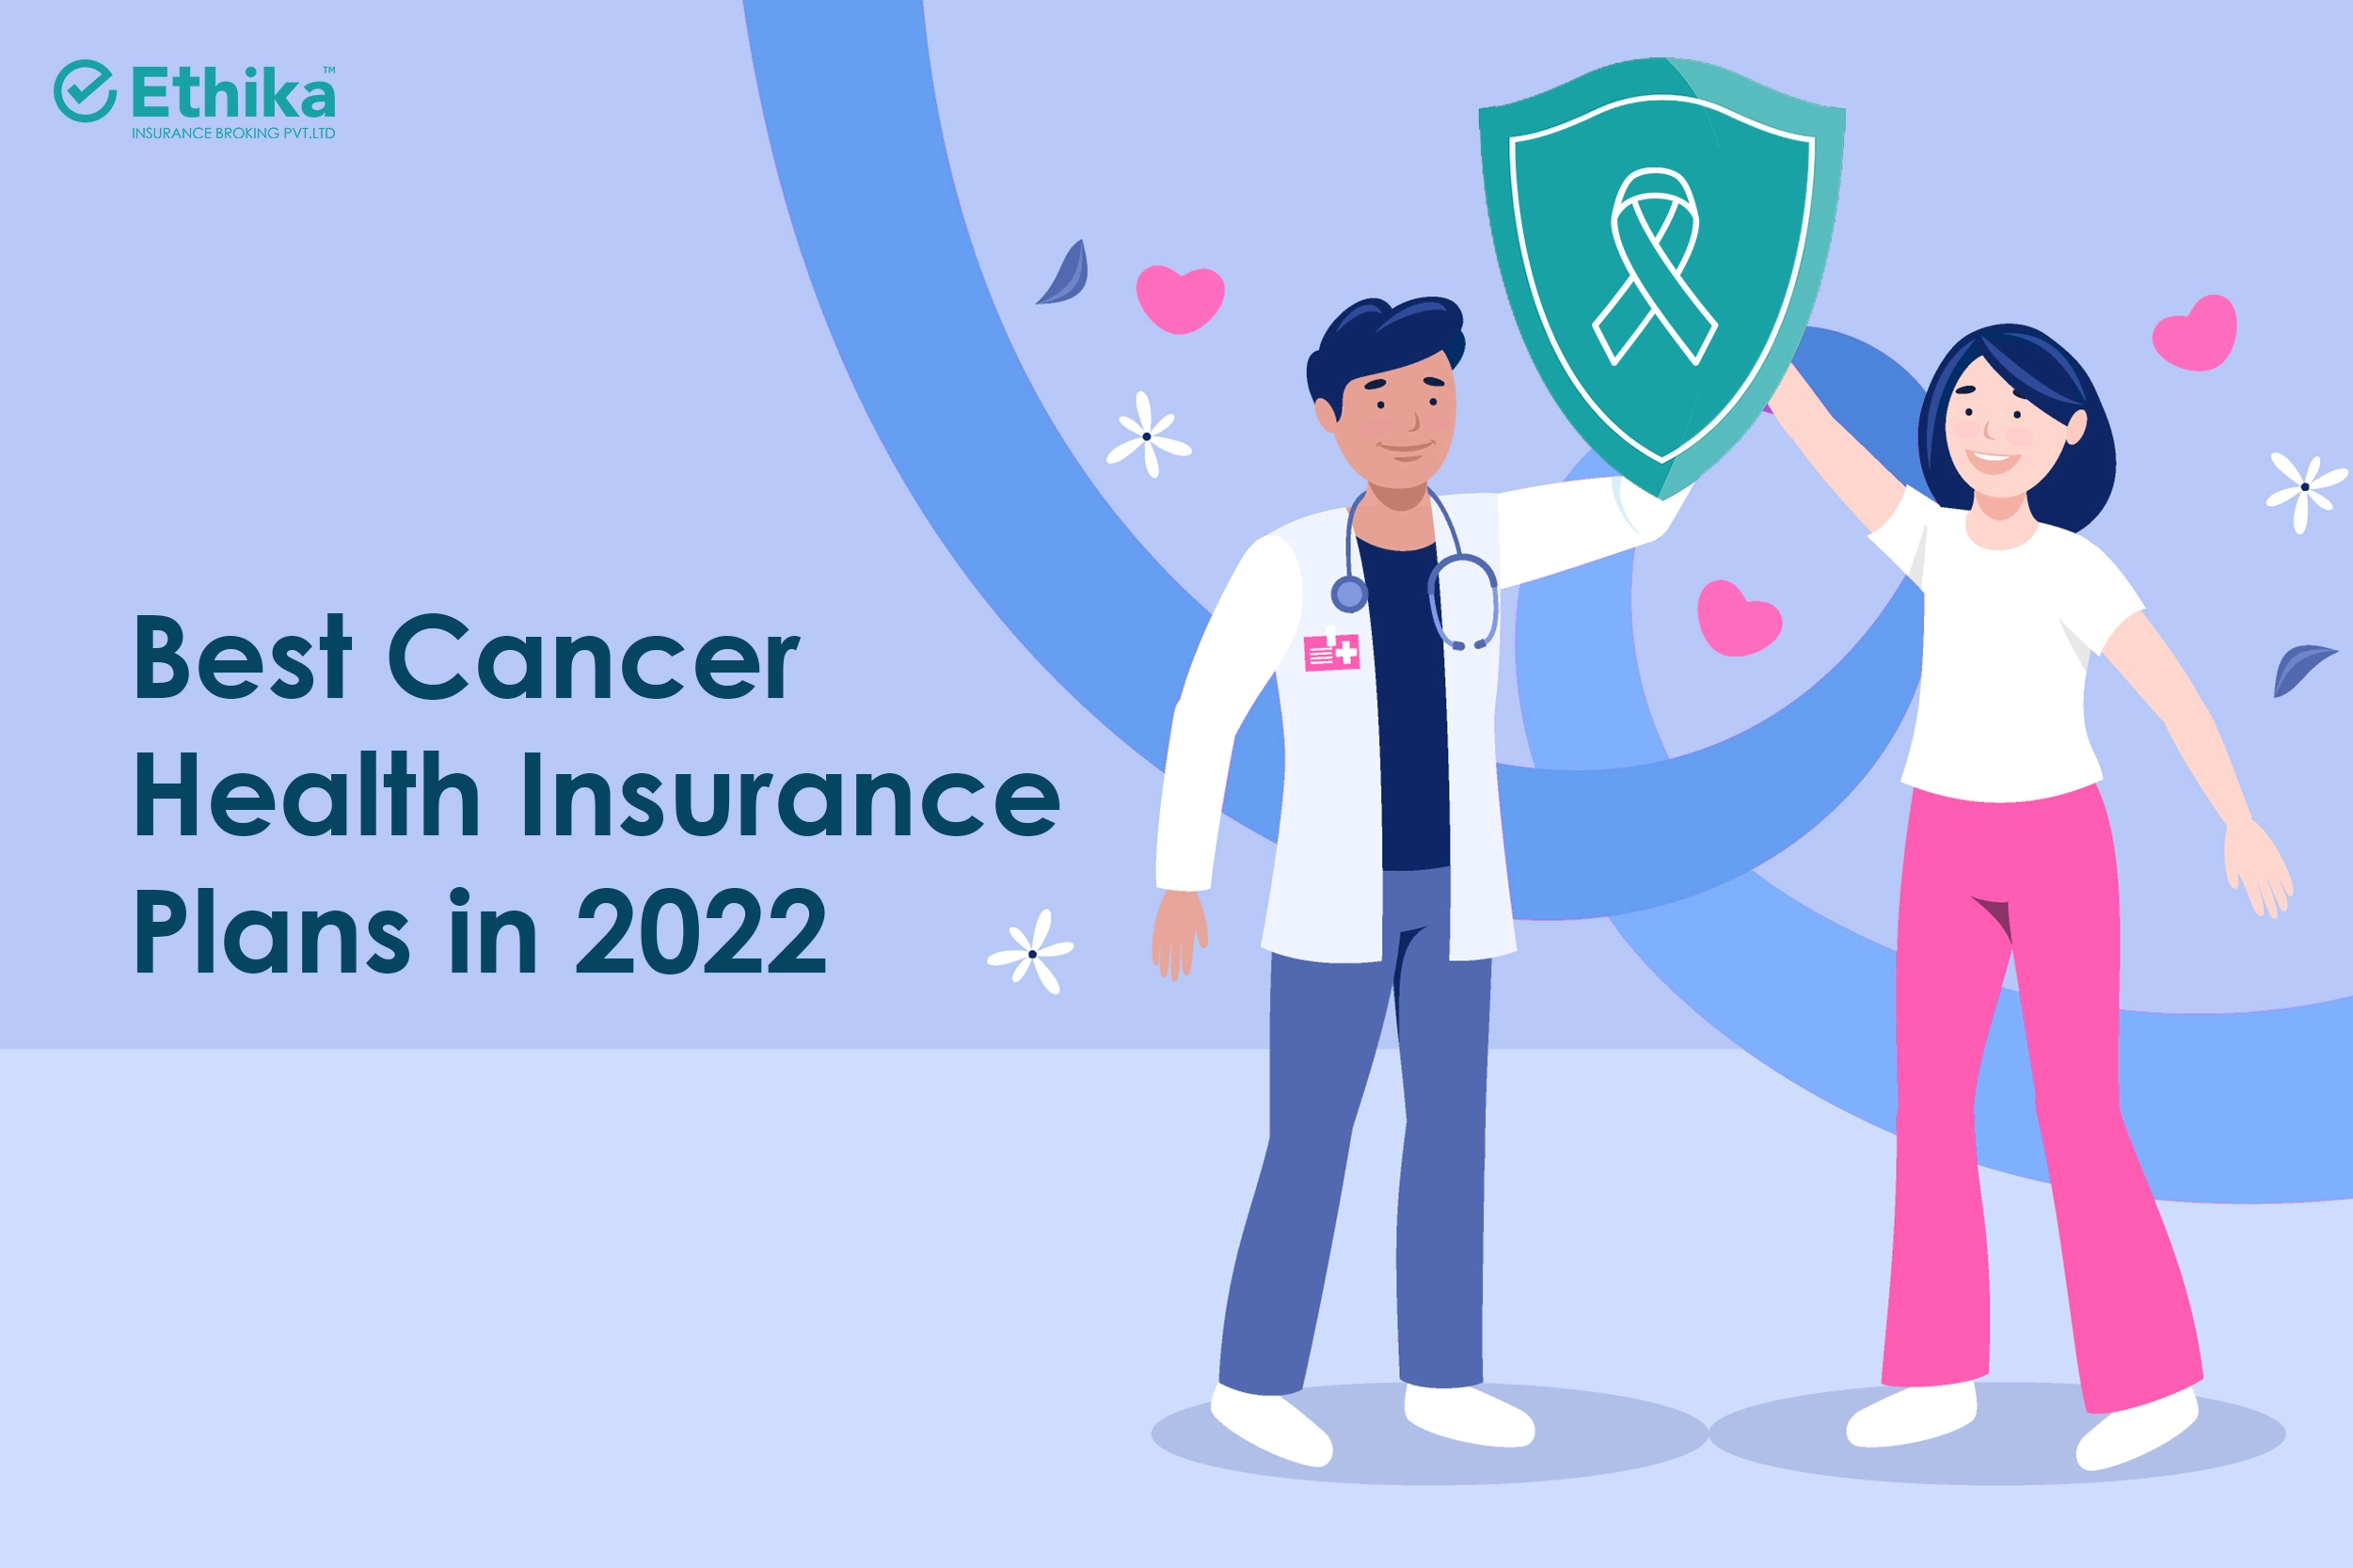 Best Cancer Health Insurance Plans in 2022